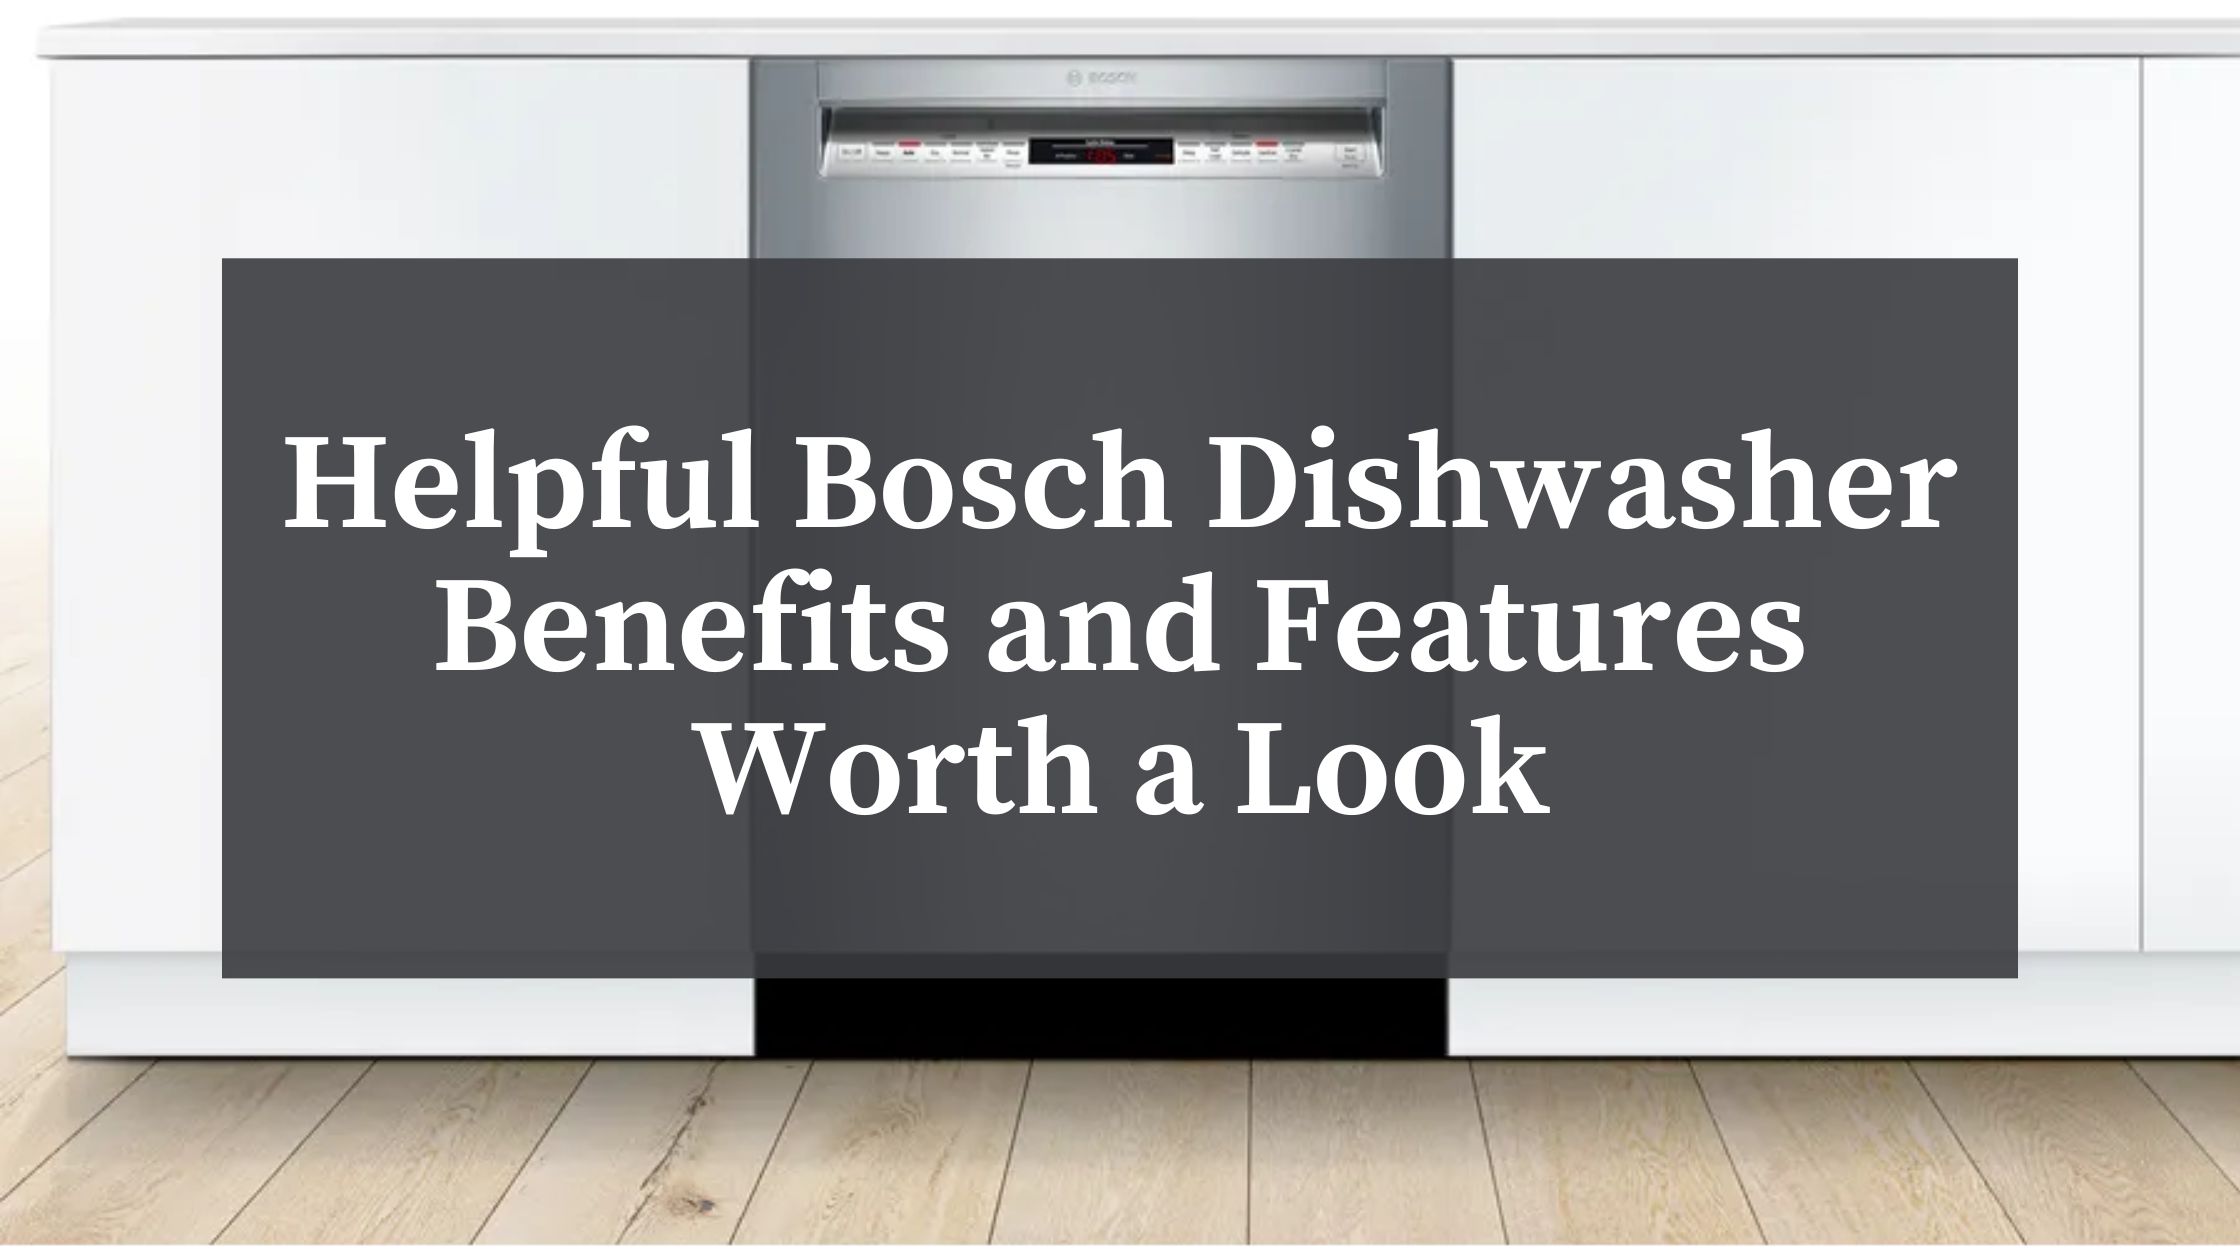 bosch dishwasher closed and in a home kitchen